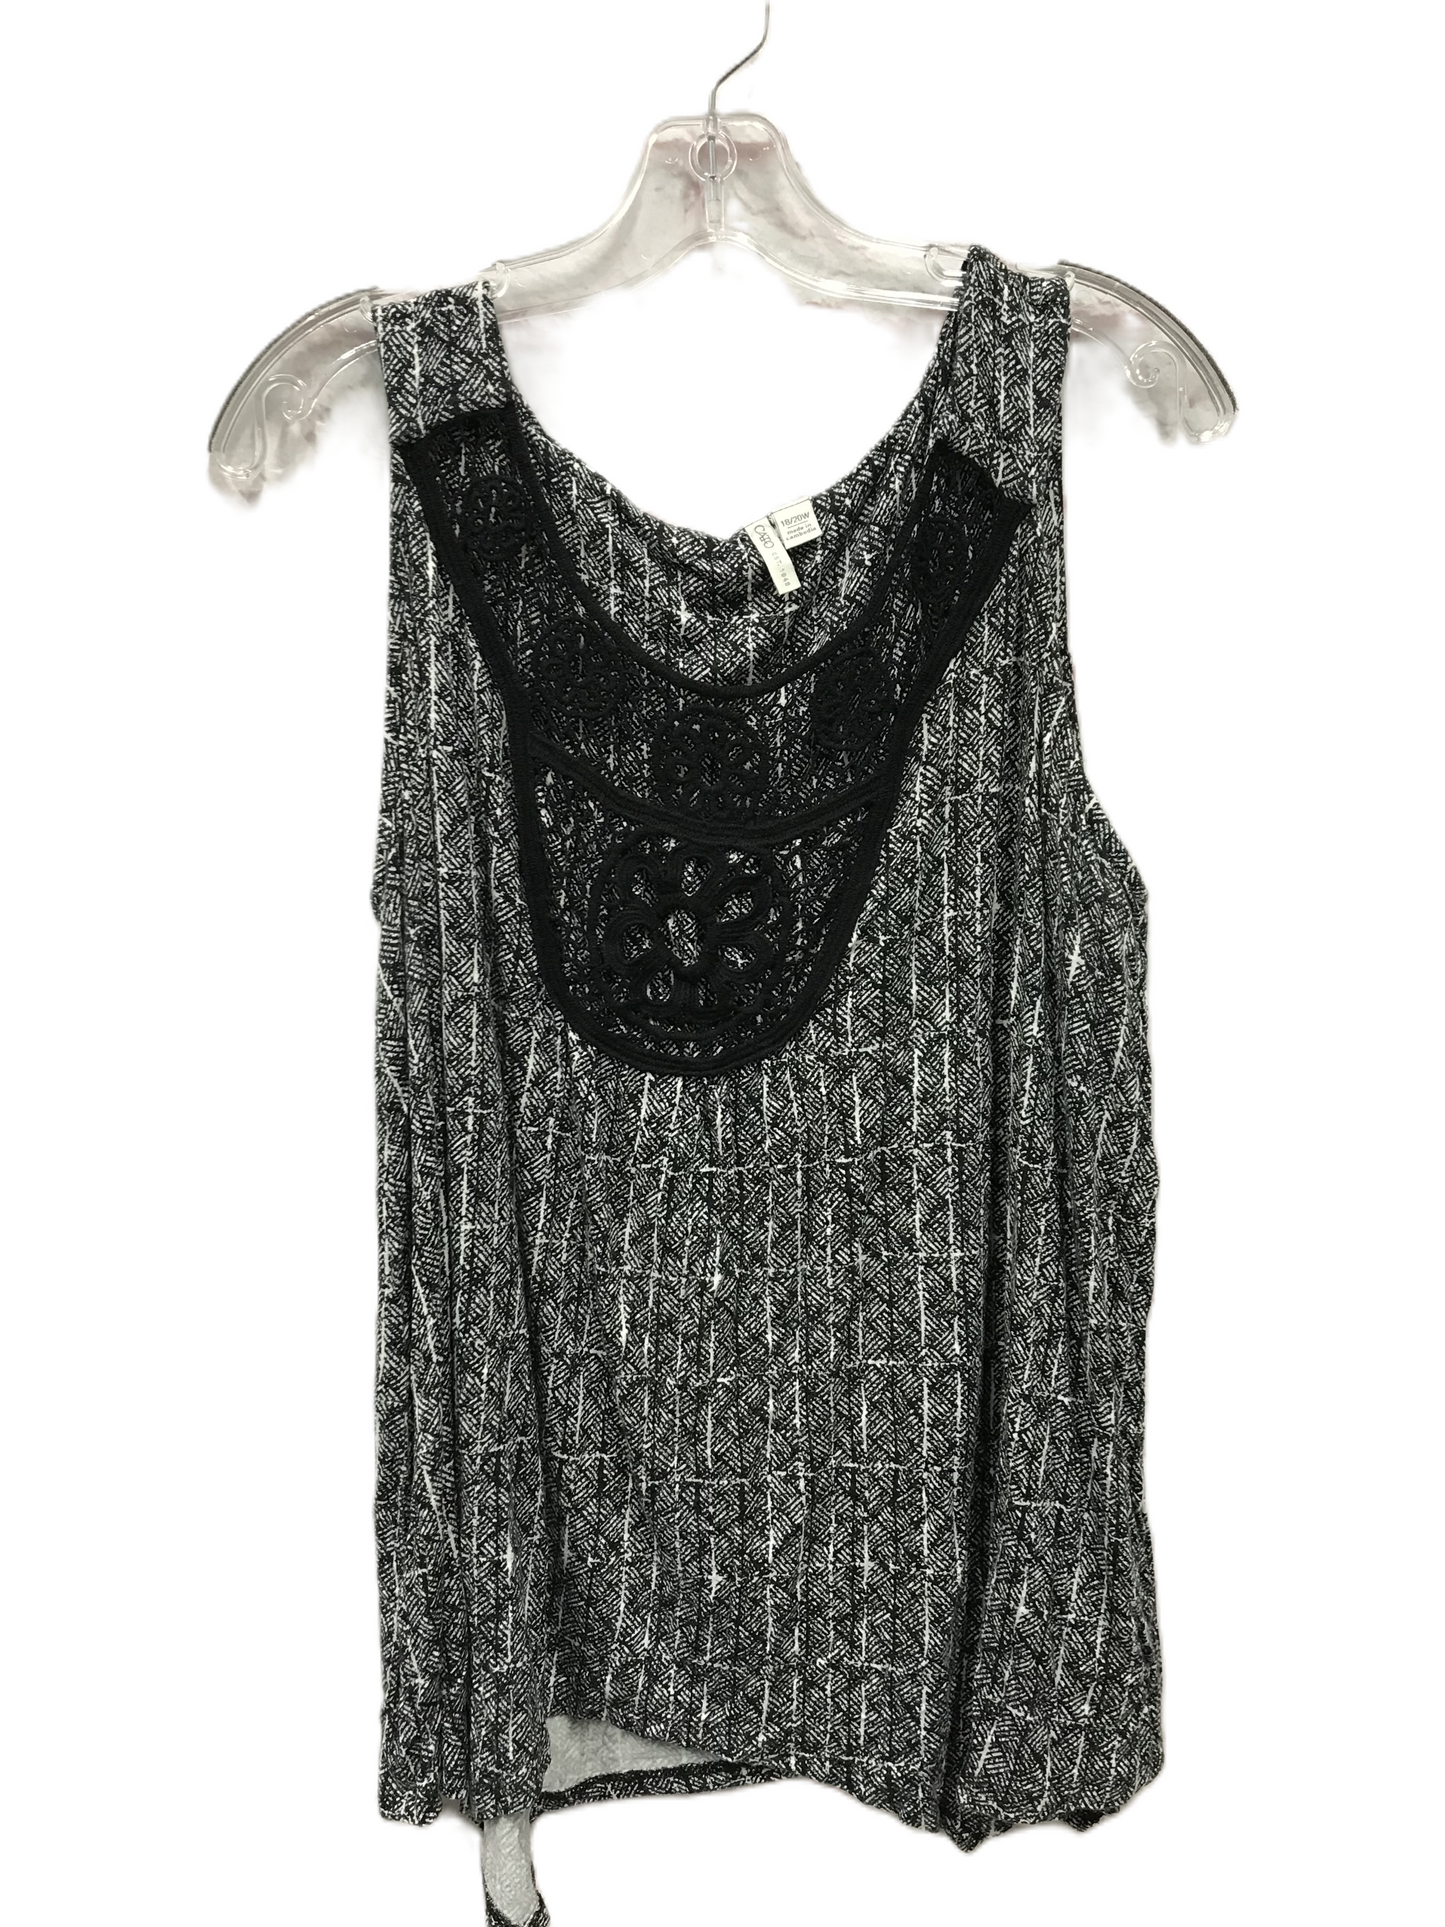 Black Top Sleeveless By Cato, Size: 1x